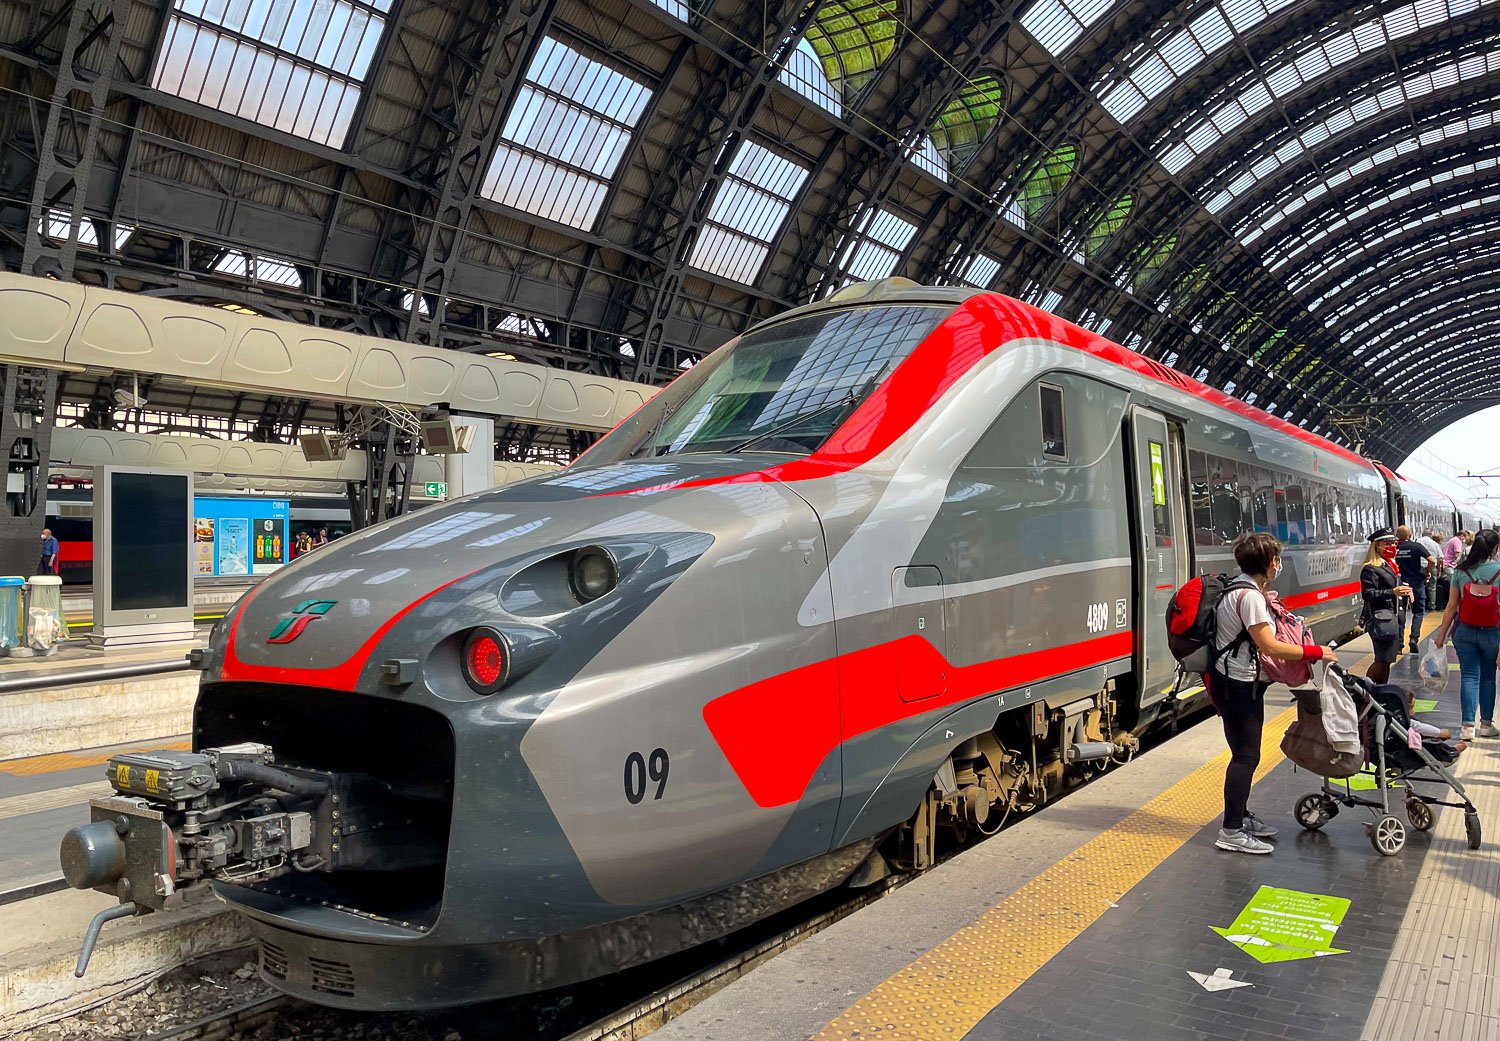 travelling italy train